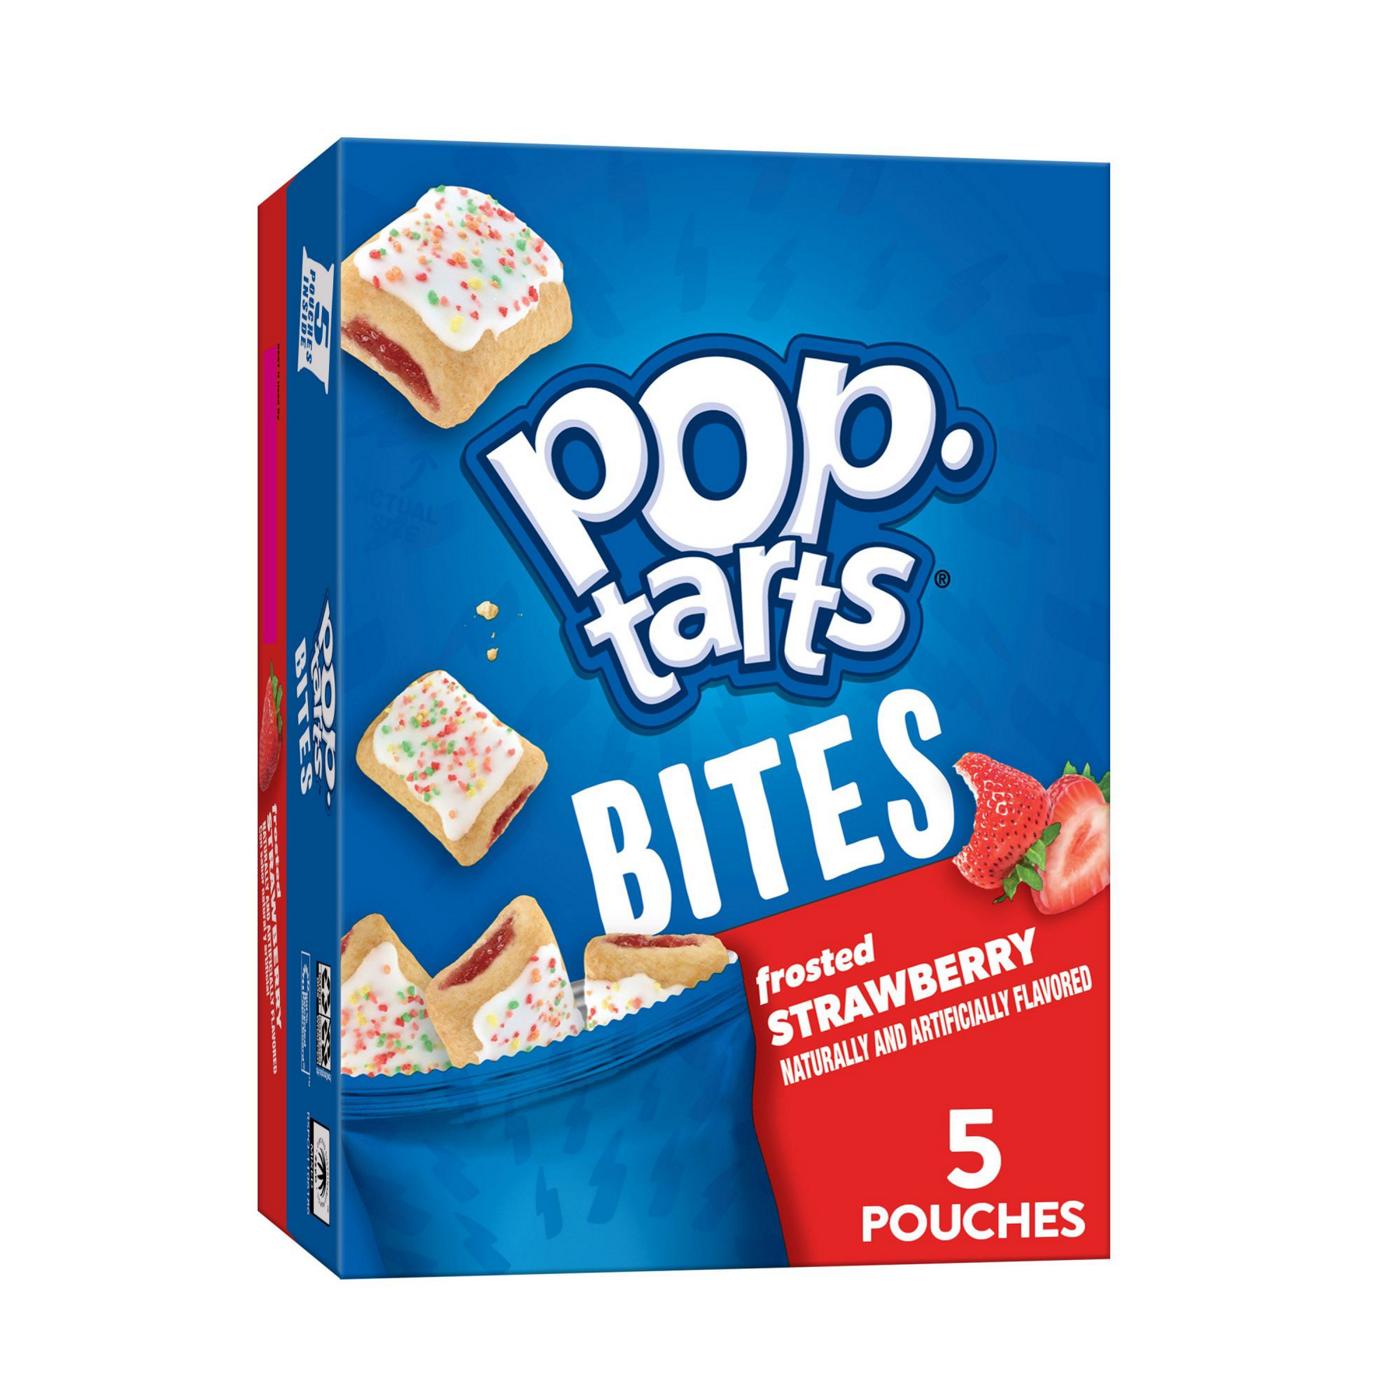 Pop-Tarts Frosted Strawberry Bites - Shop Toaster Pastries at H-E-B